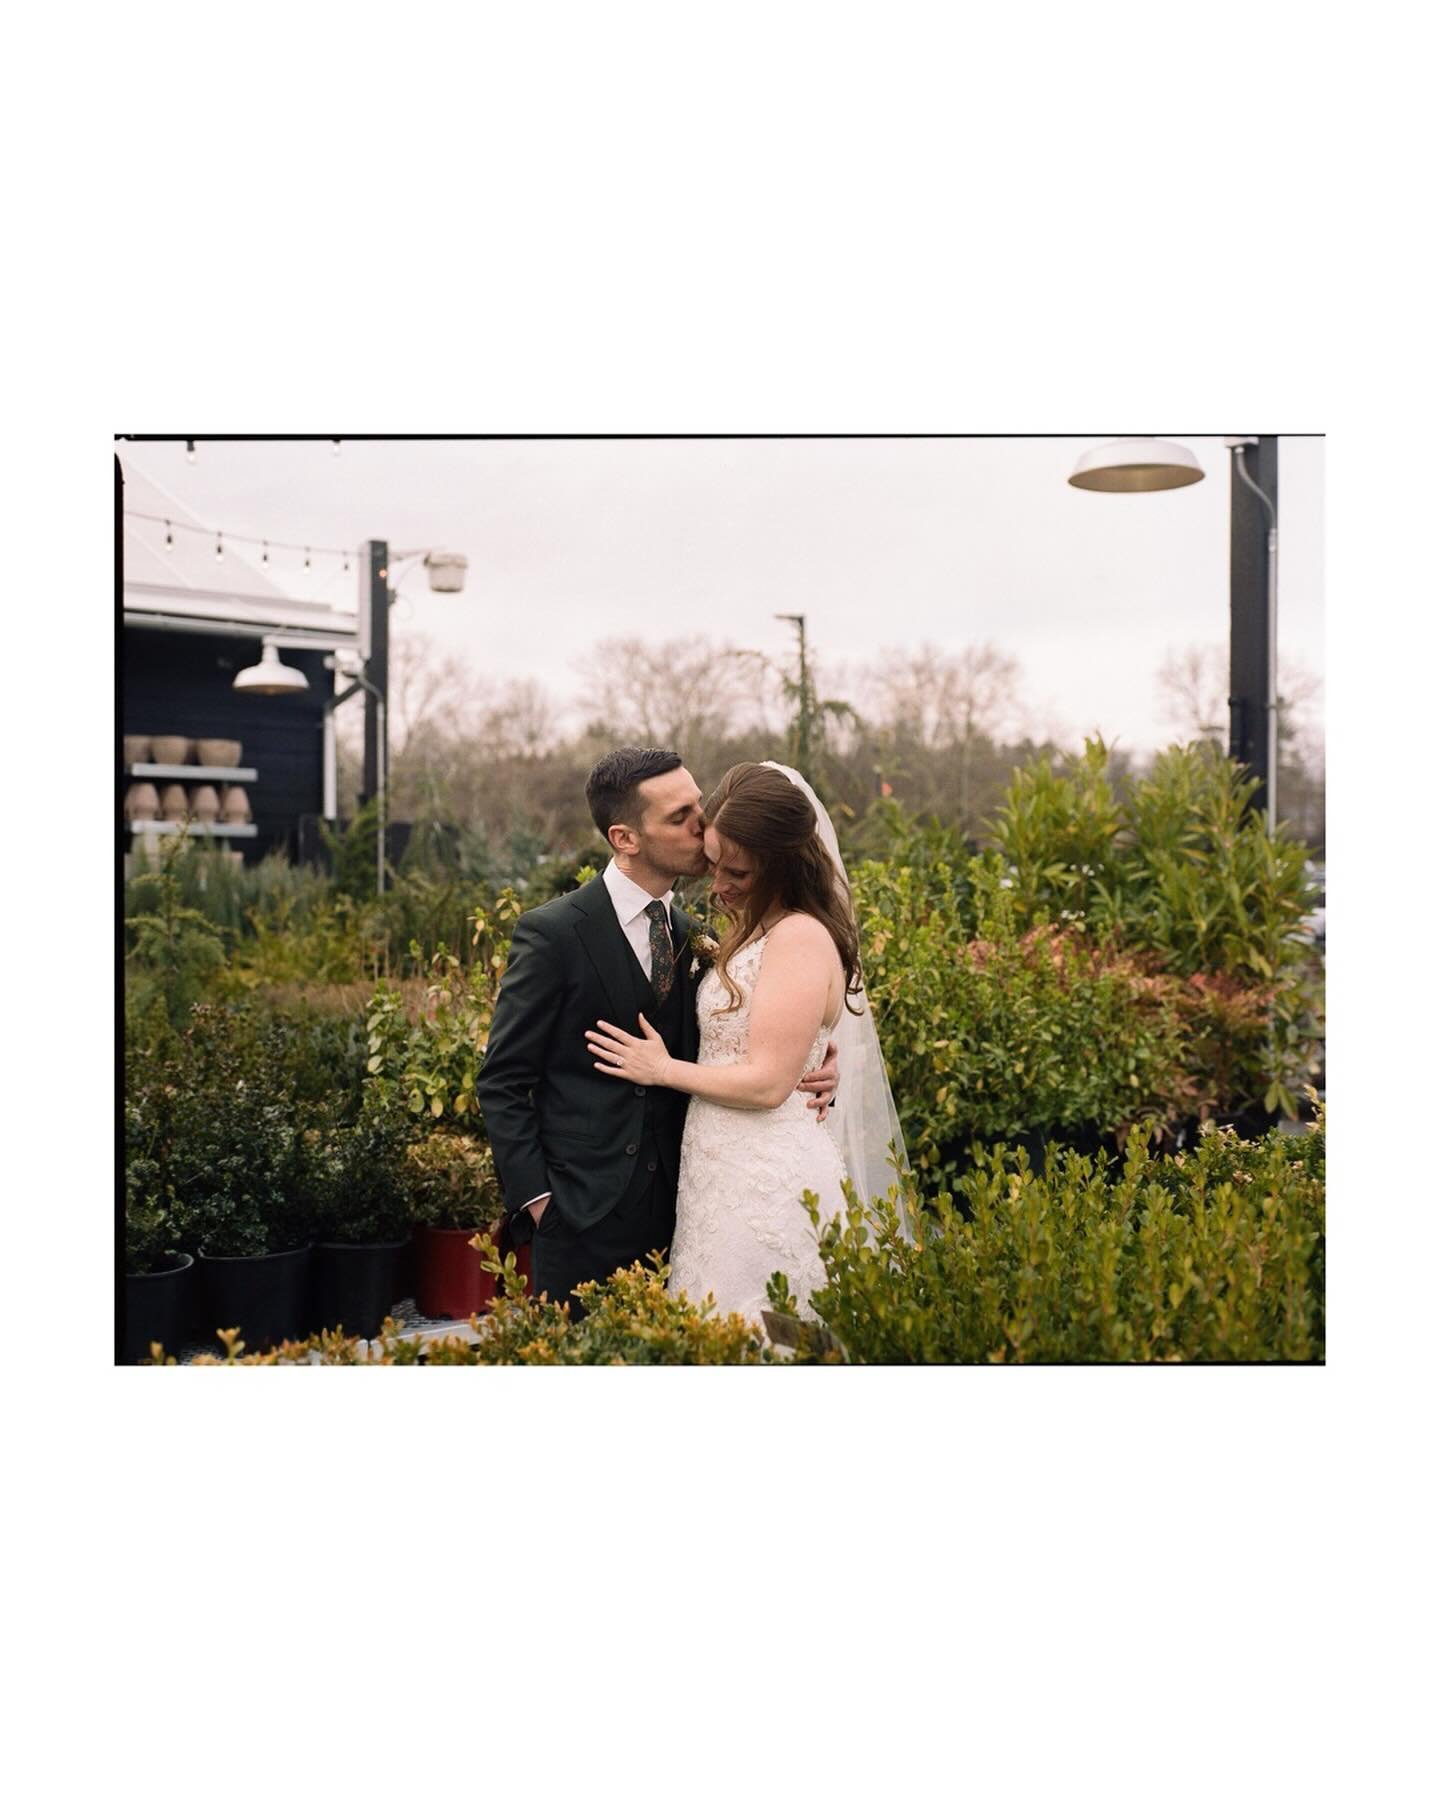 Some film snaps from this beautiful @terrain_delval wedding. Can&rsquo;t wait to share more from this day!